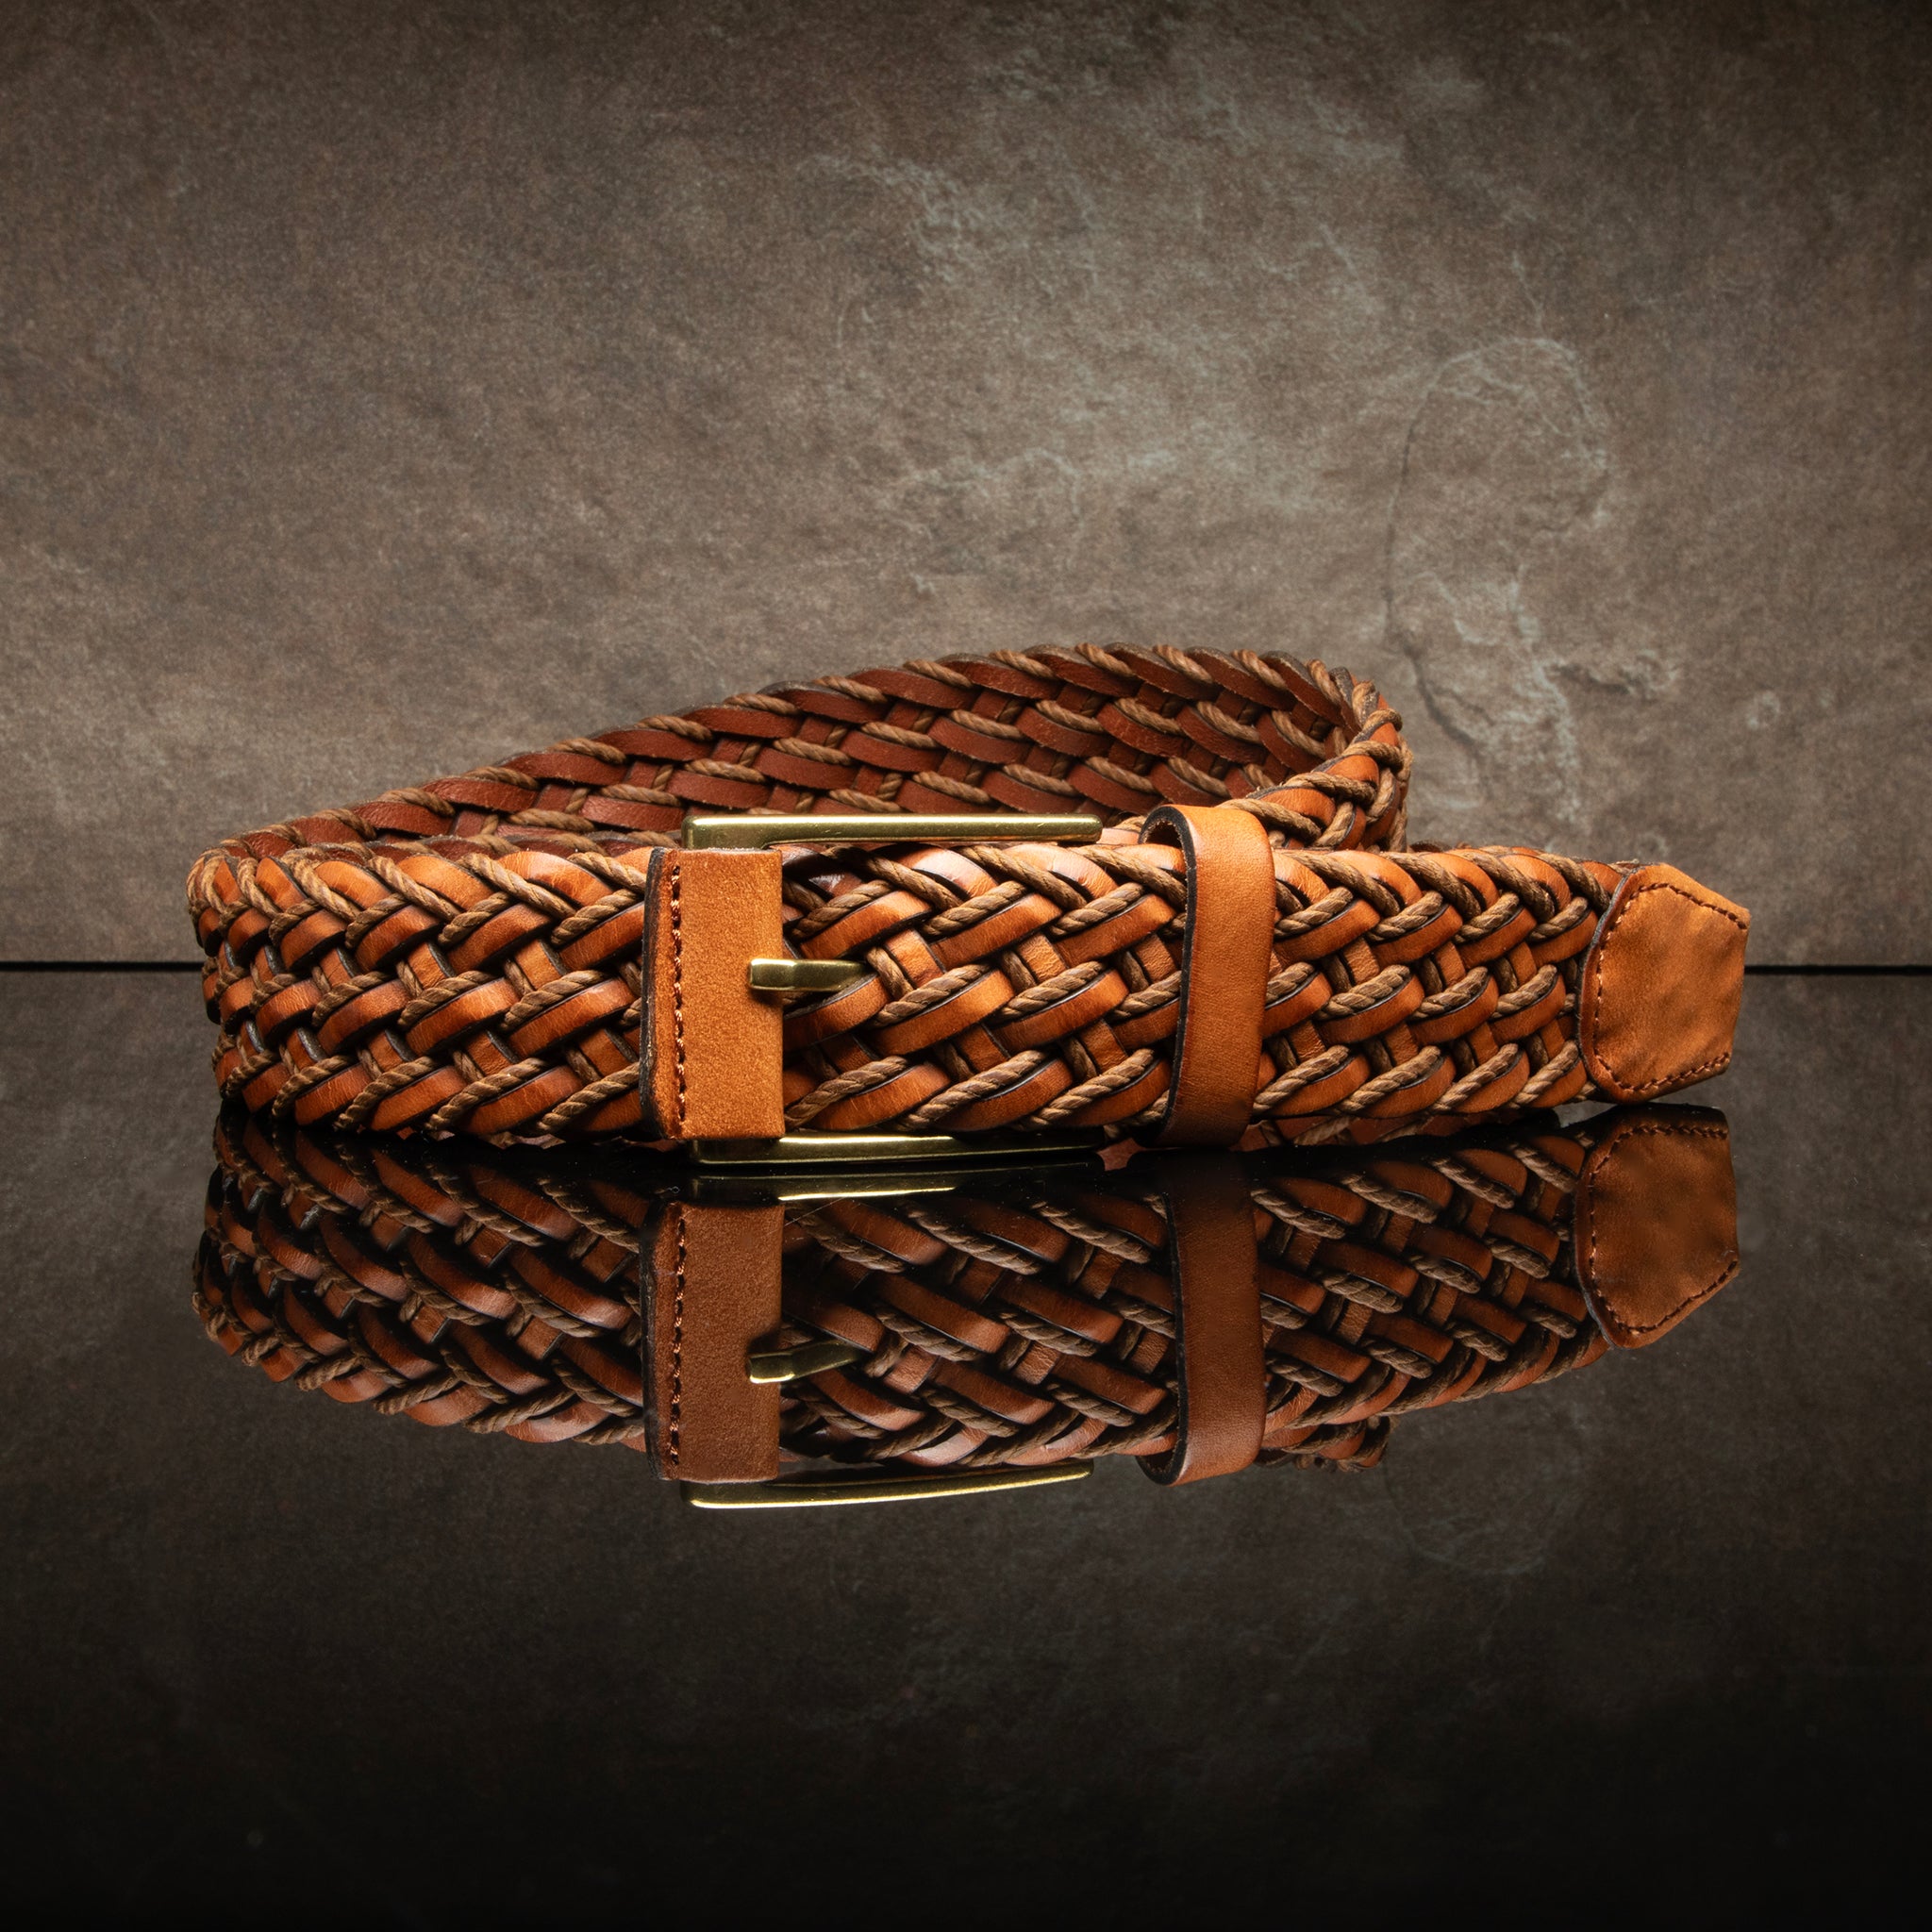 LEATHER BRAIDED WAXED CORD BELT - TAN